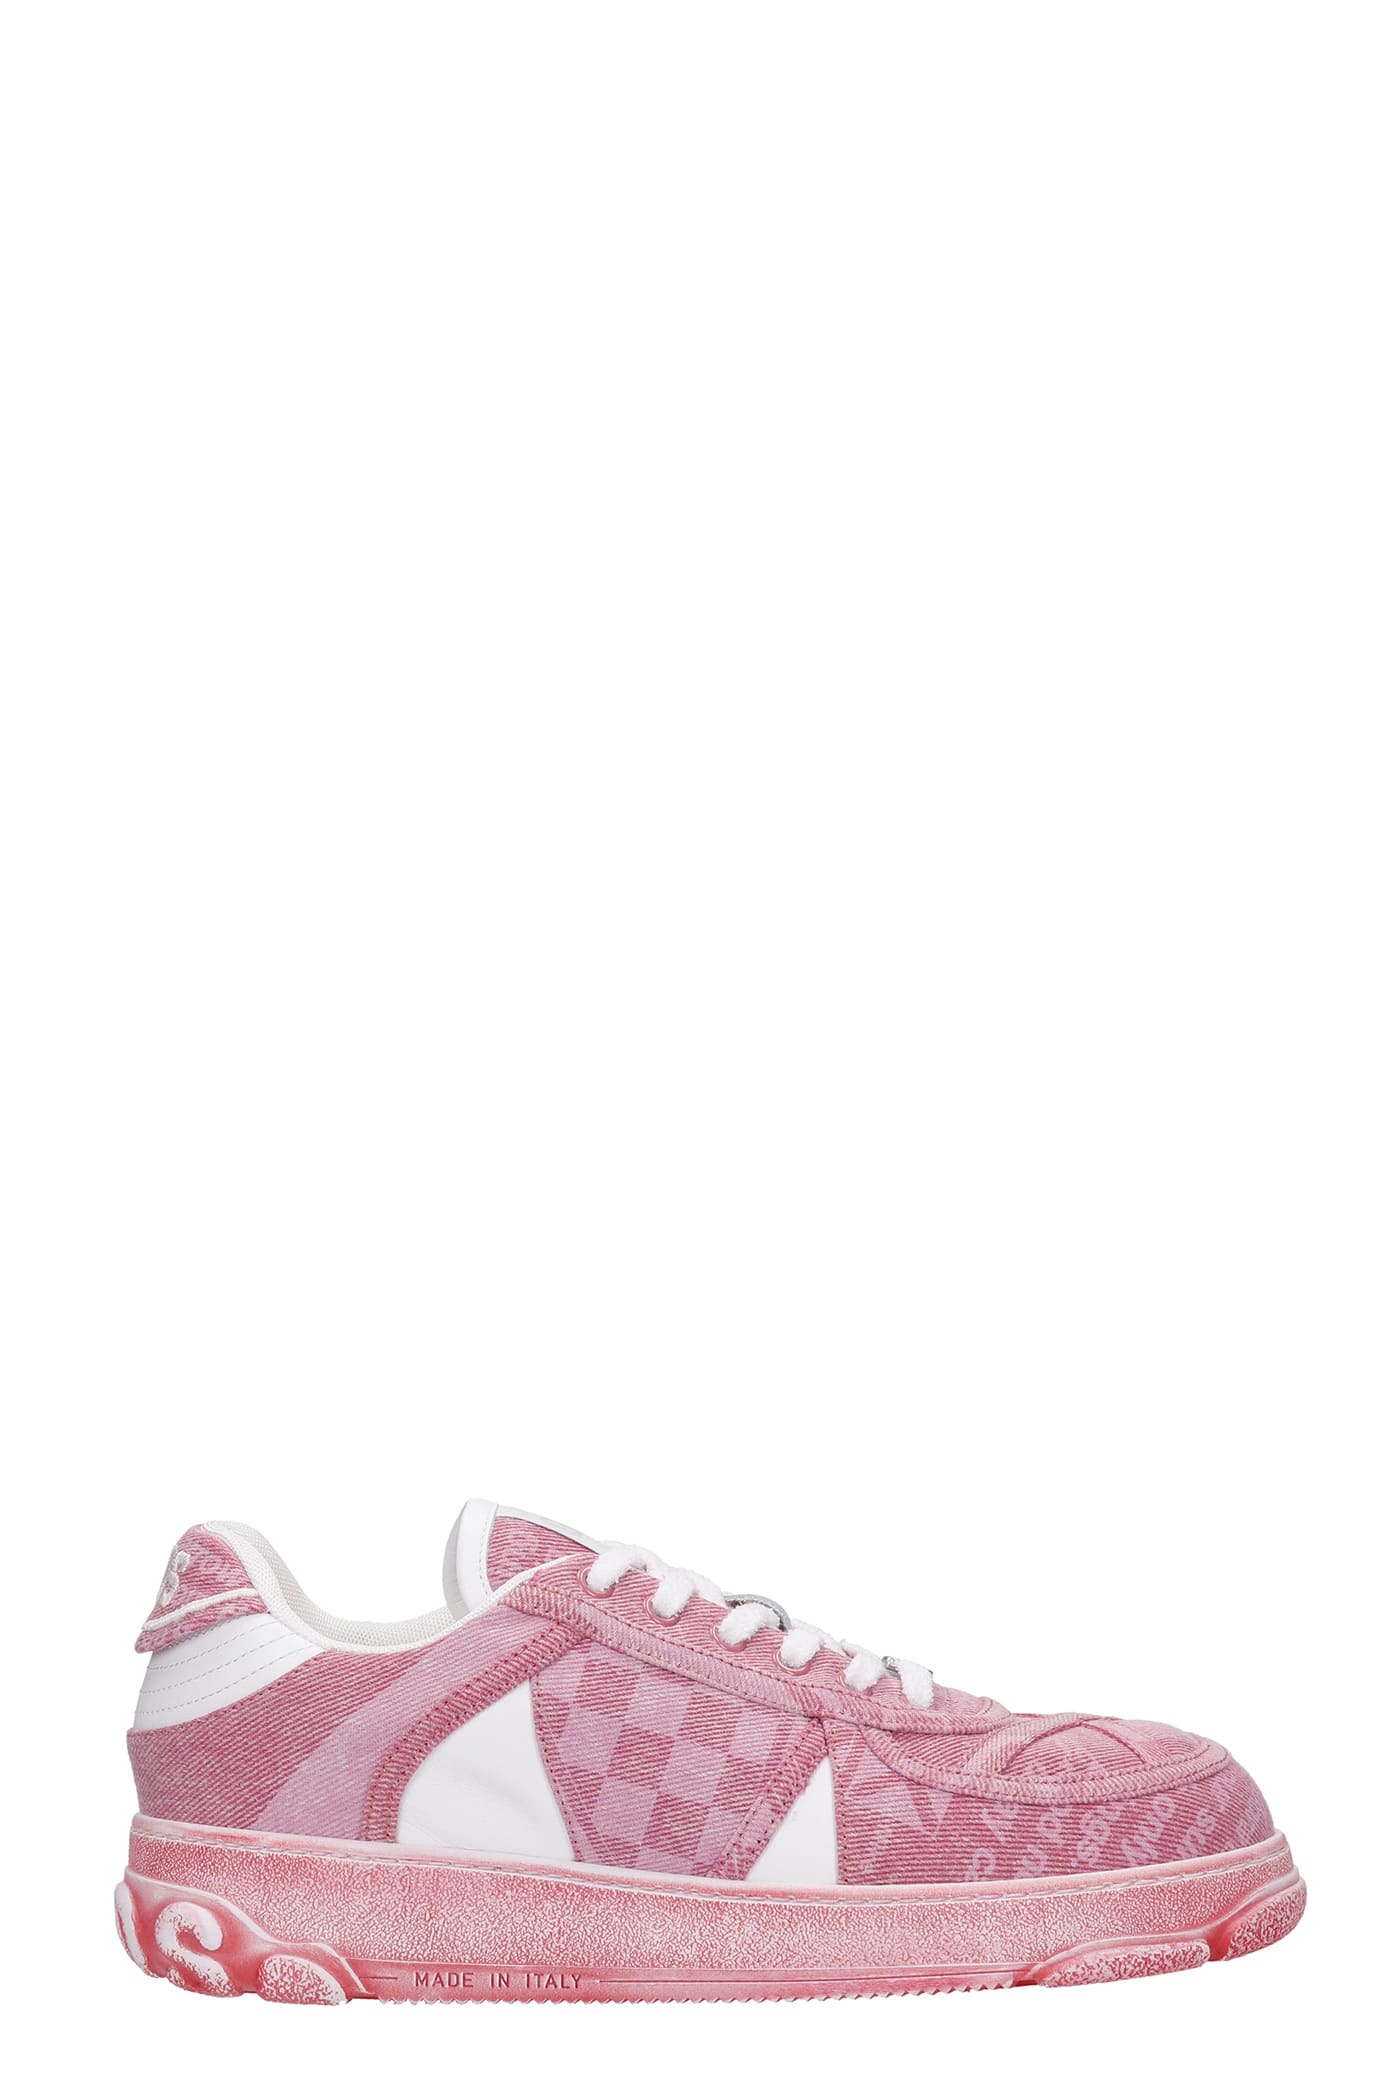 GCDS Sneakers In Rose-pink Cotton